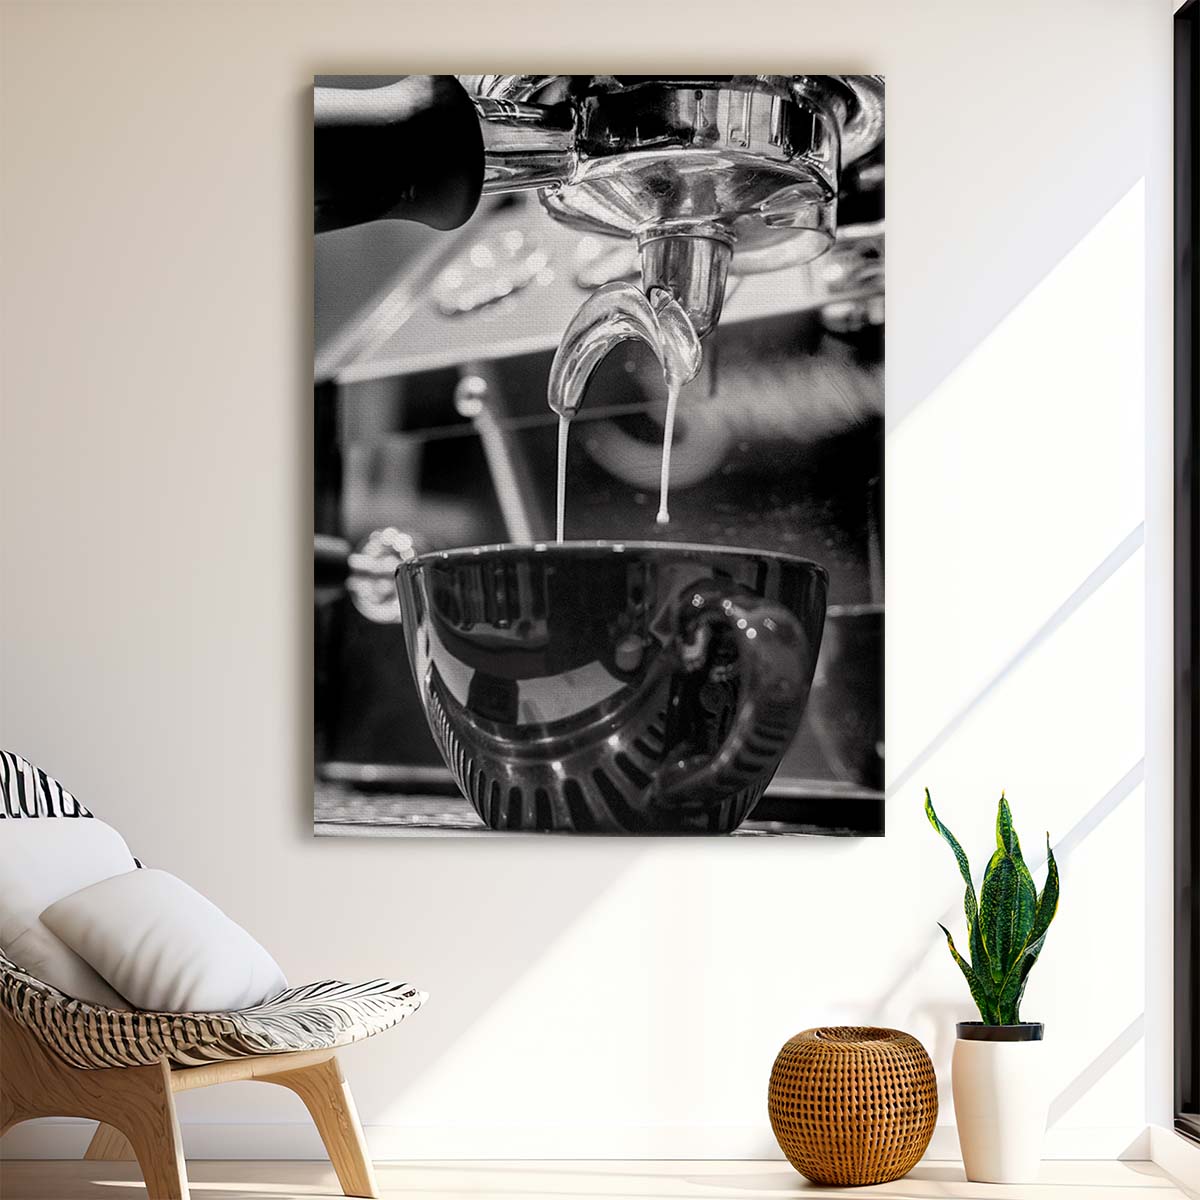 Monochrome Coffee Dripping Cup Still Life Photography Artwork by Luxuriance Designs, made in USA